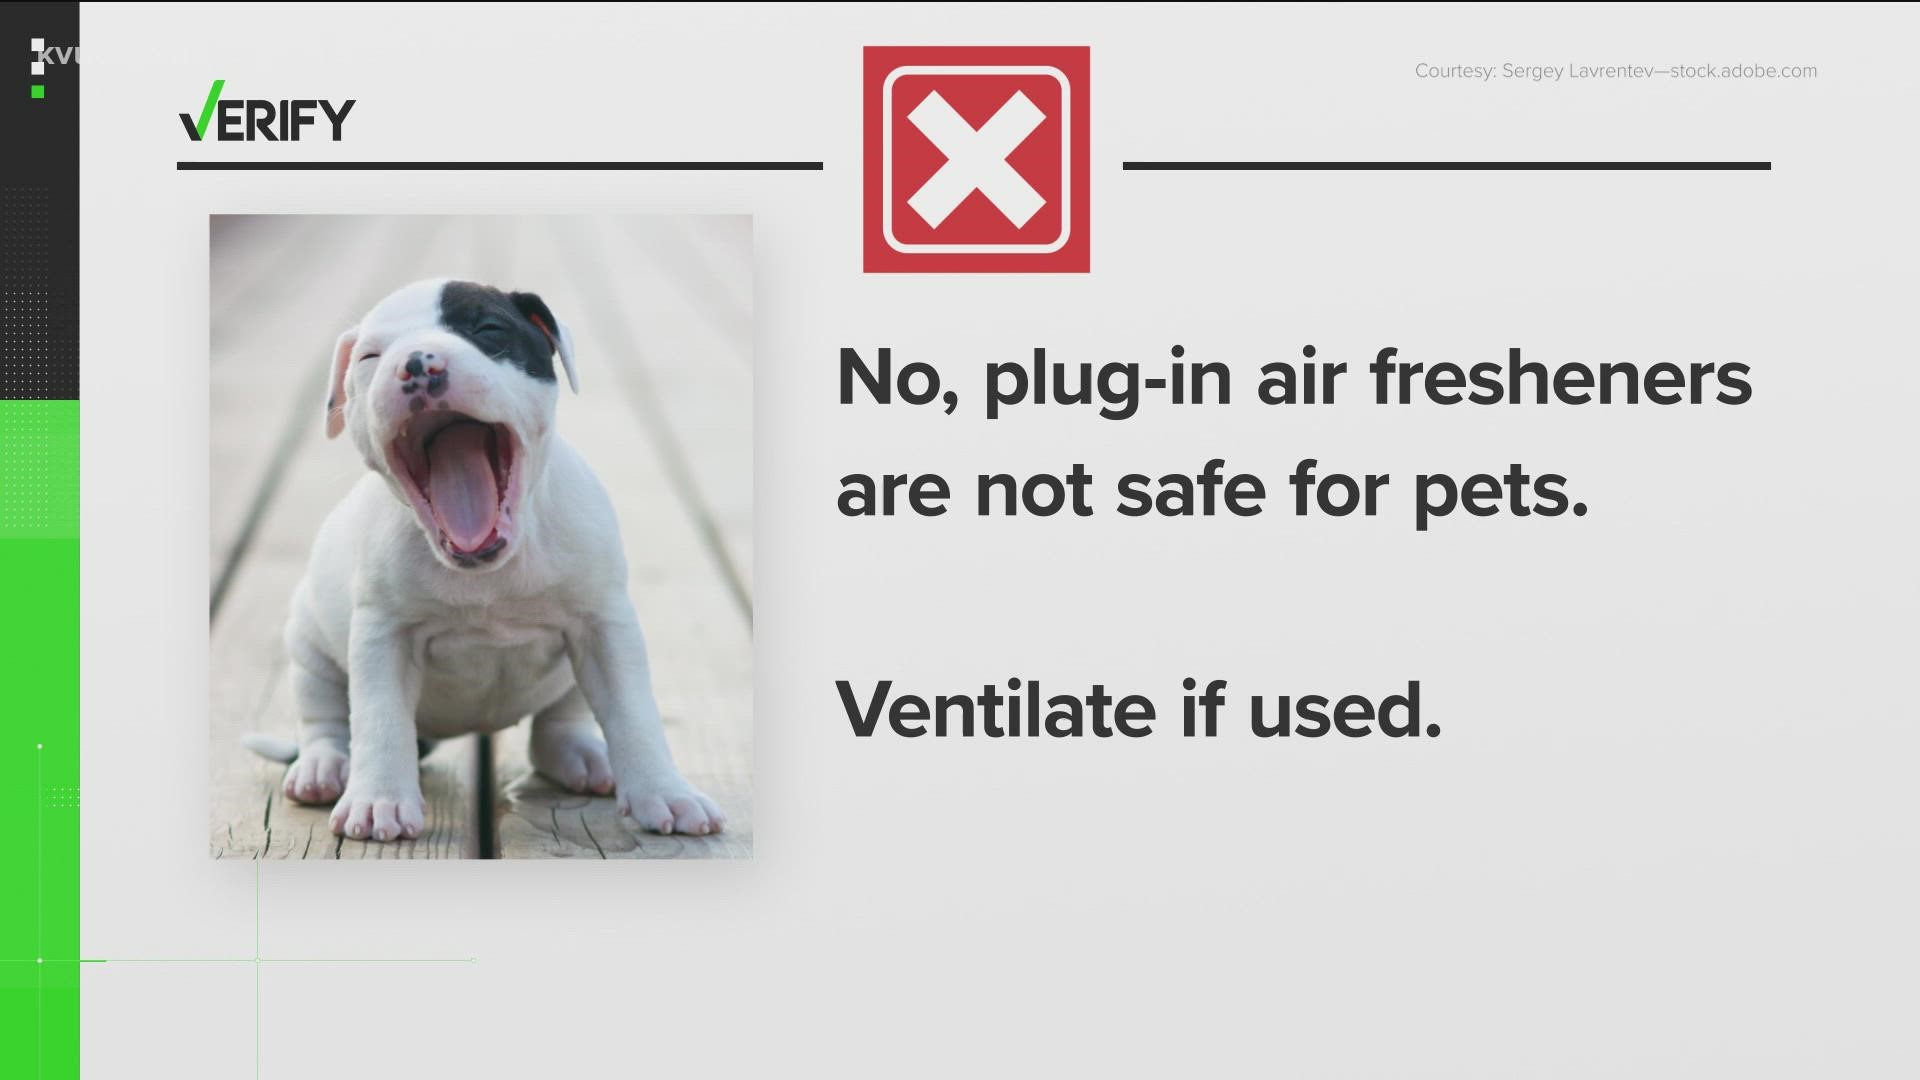 Are plug-in air fresheners safe for pets? 